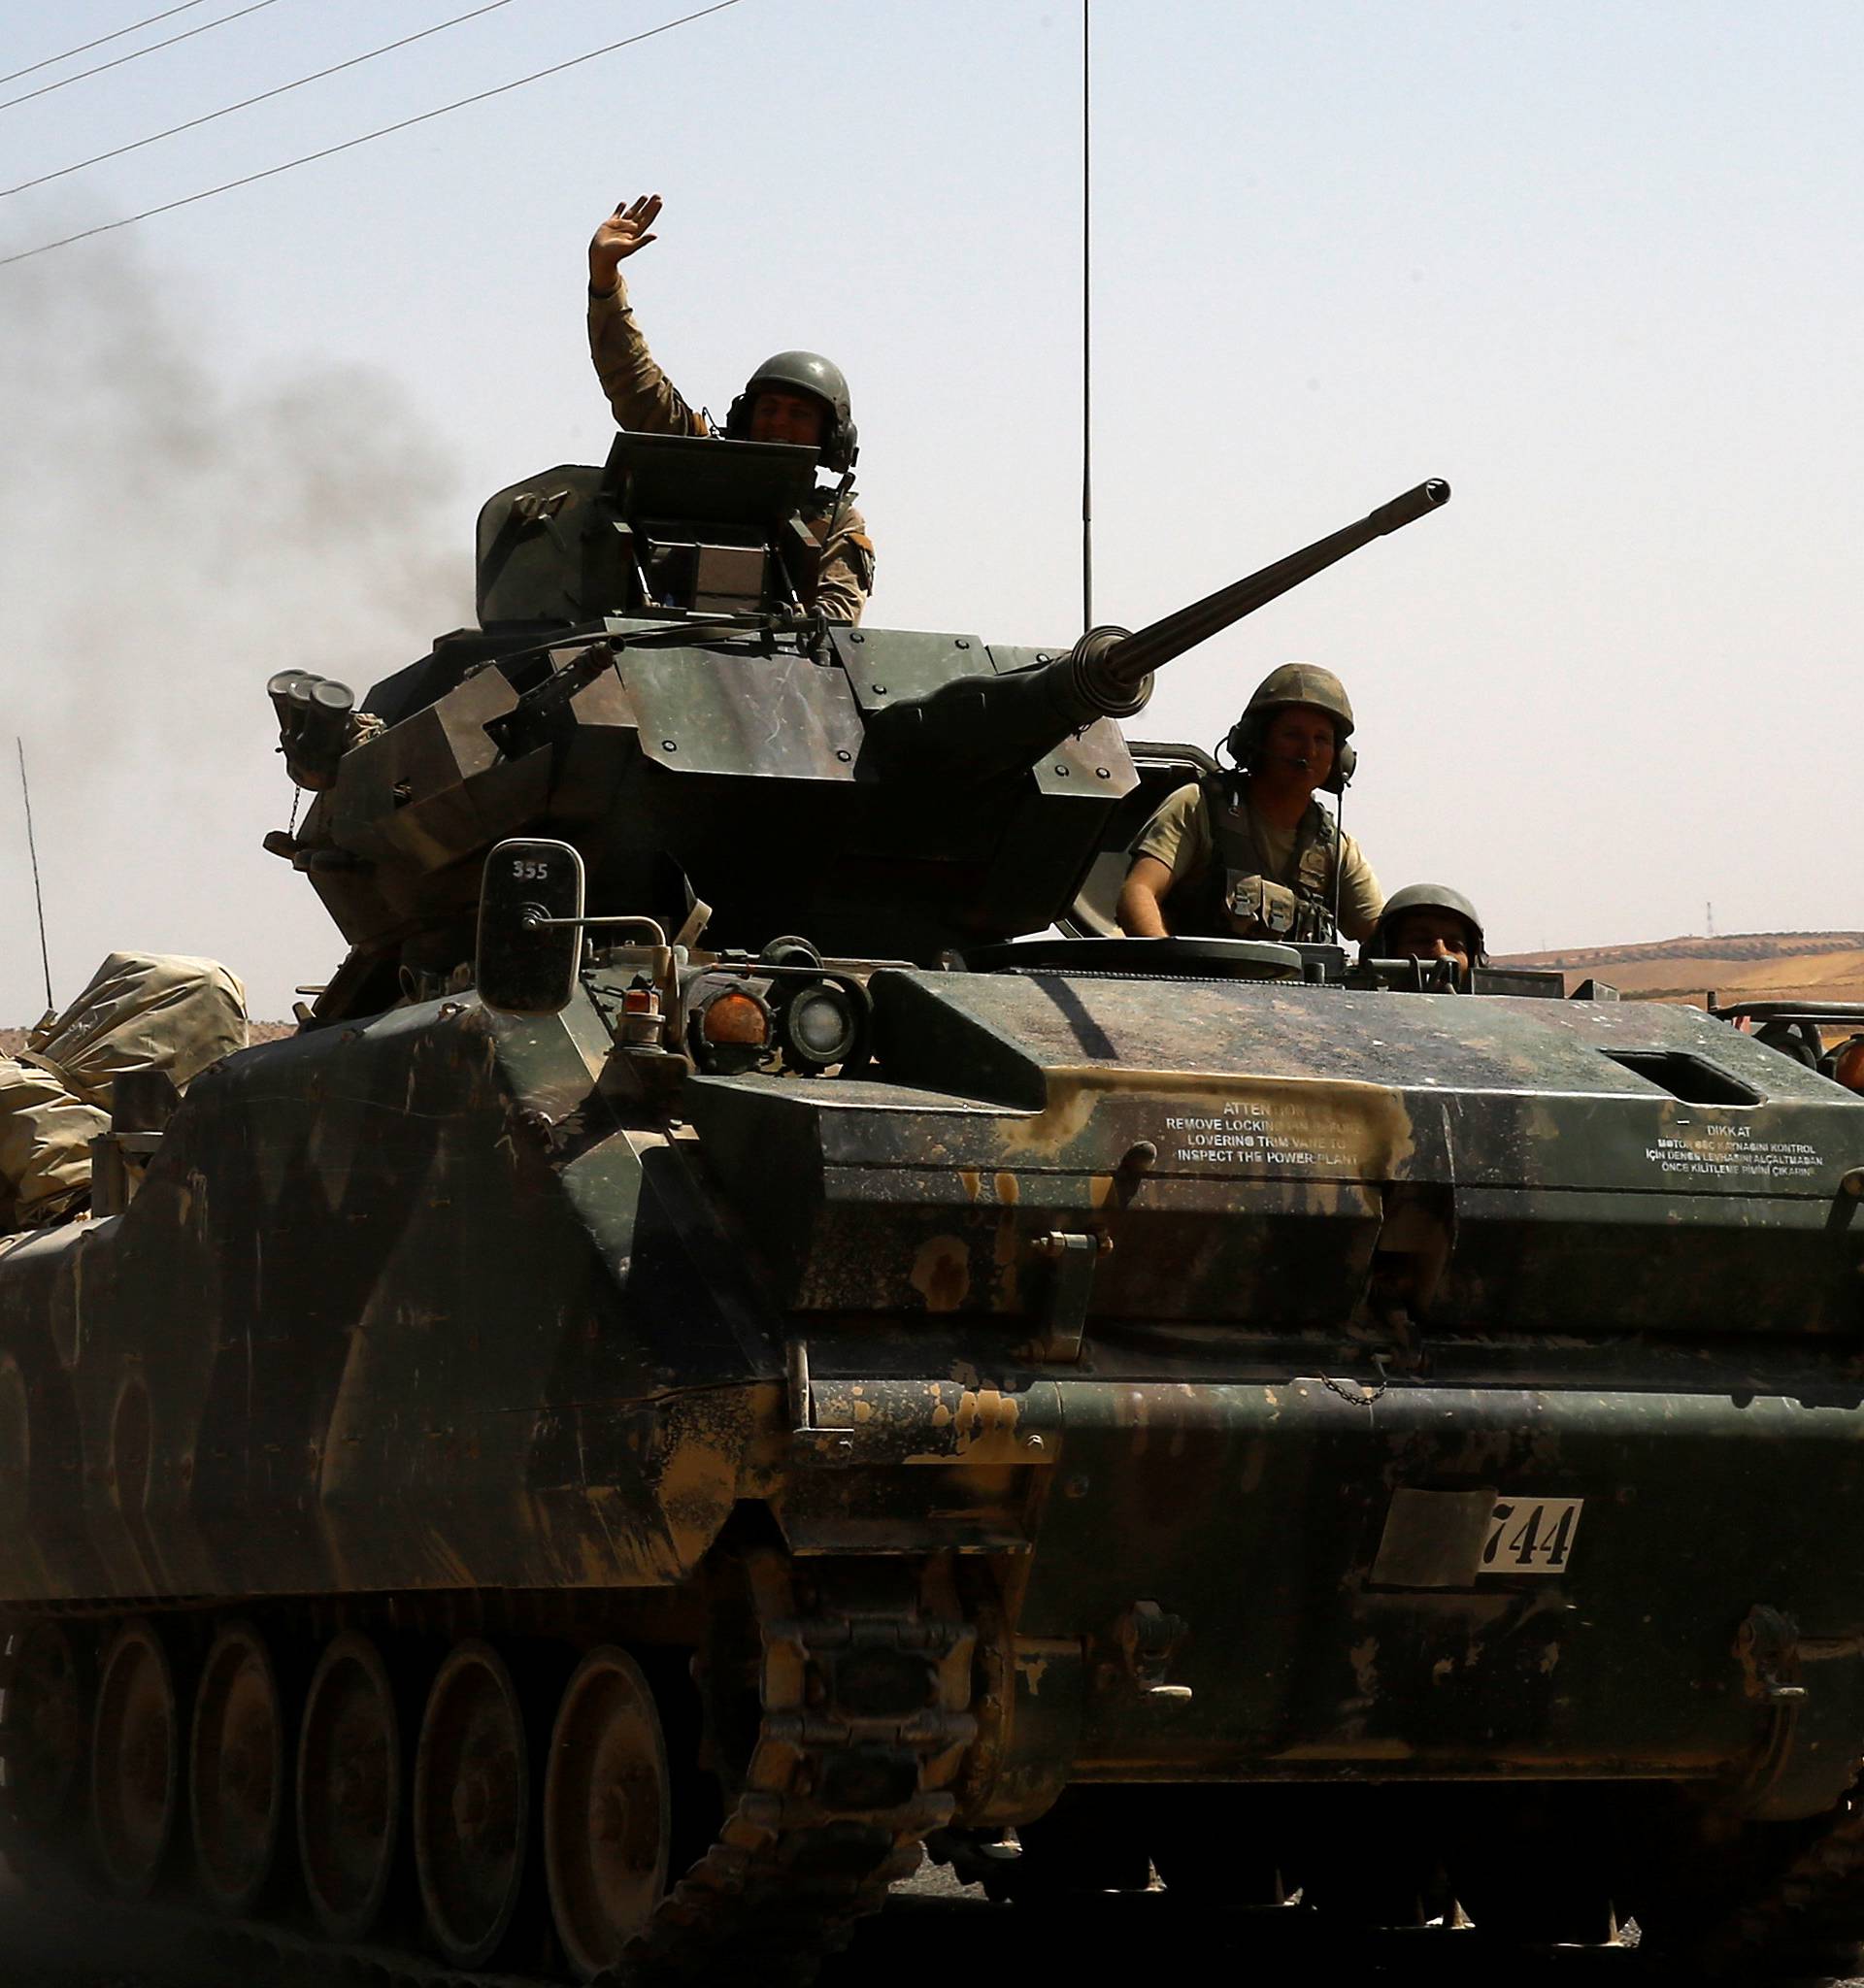 A Turkish soldier on an armoured personnel carrier waves as they drive from the border back to their base in Karkamis on the Turkish-Syrian border 